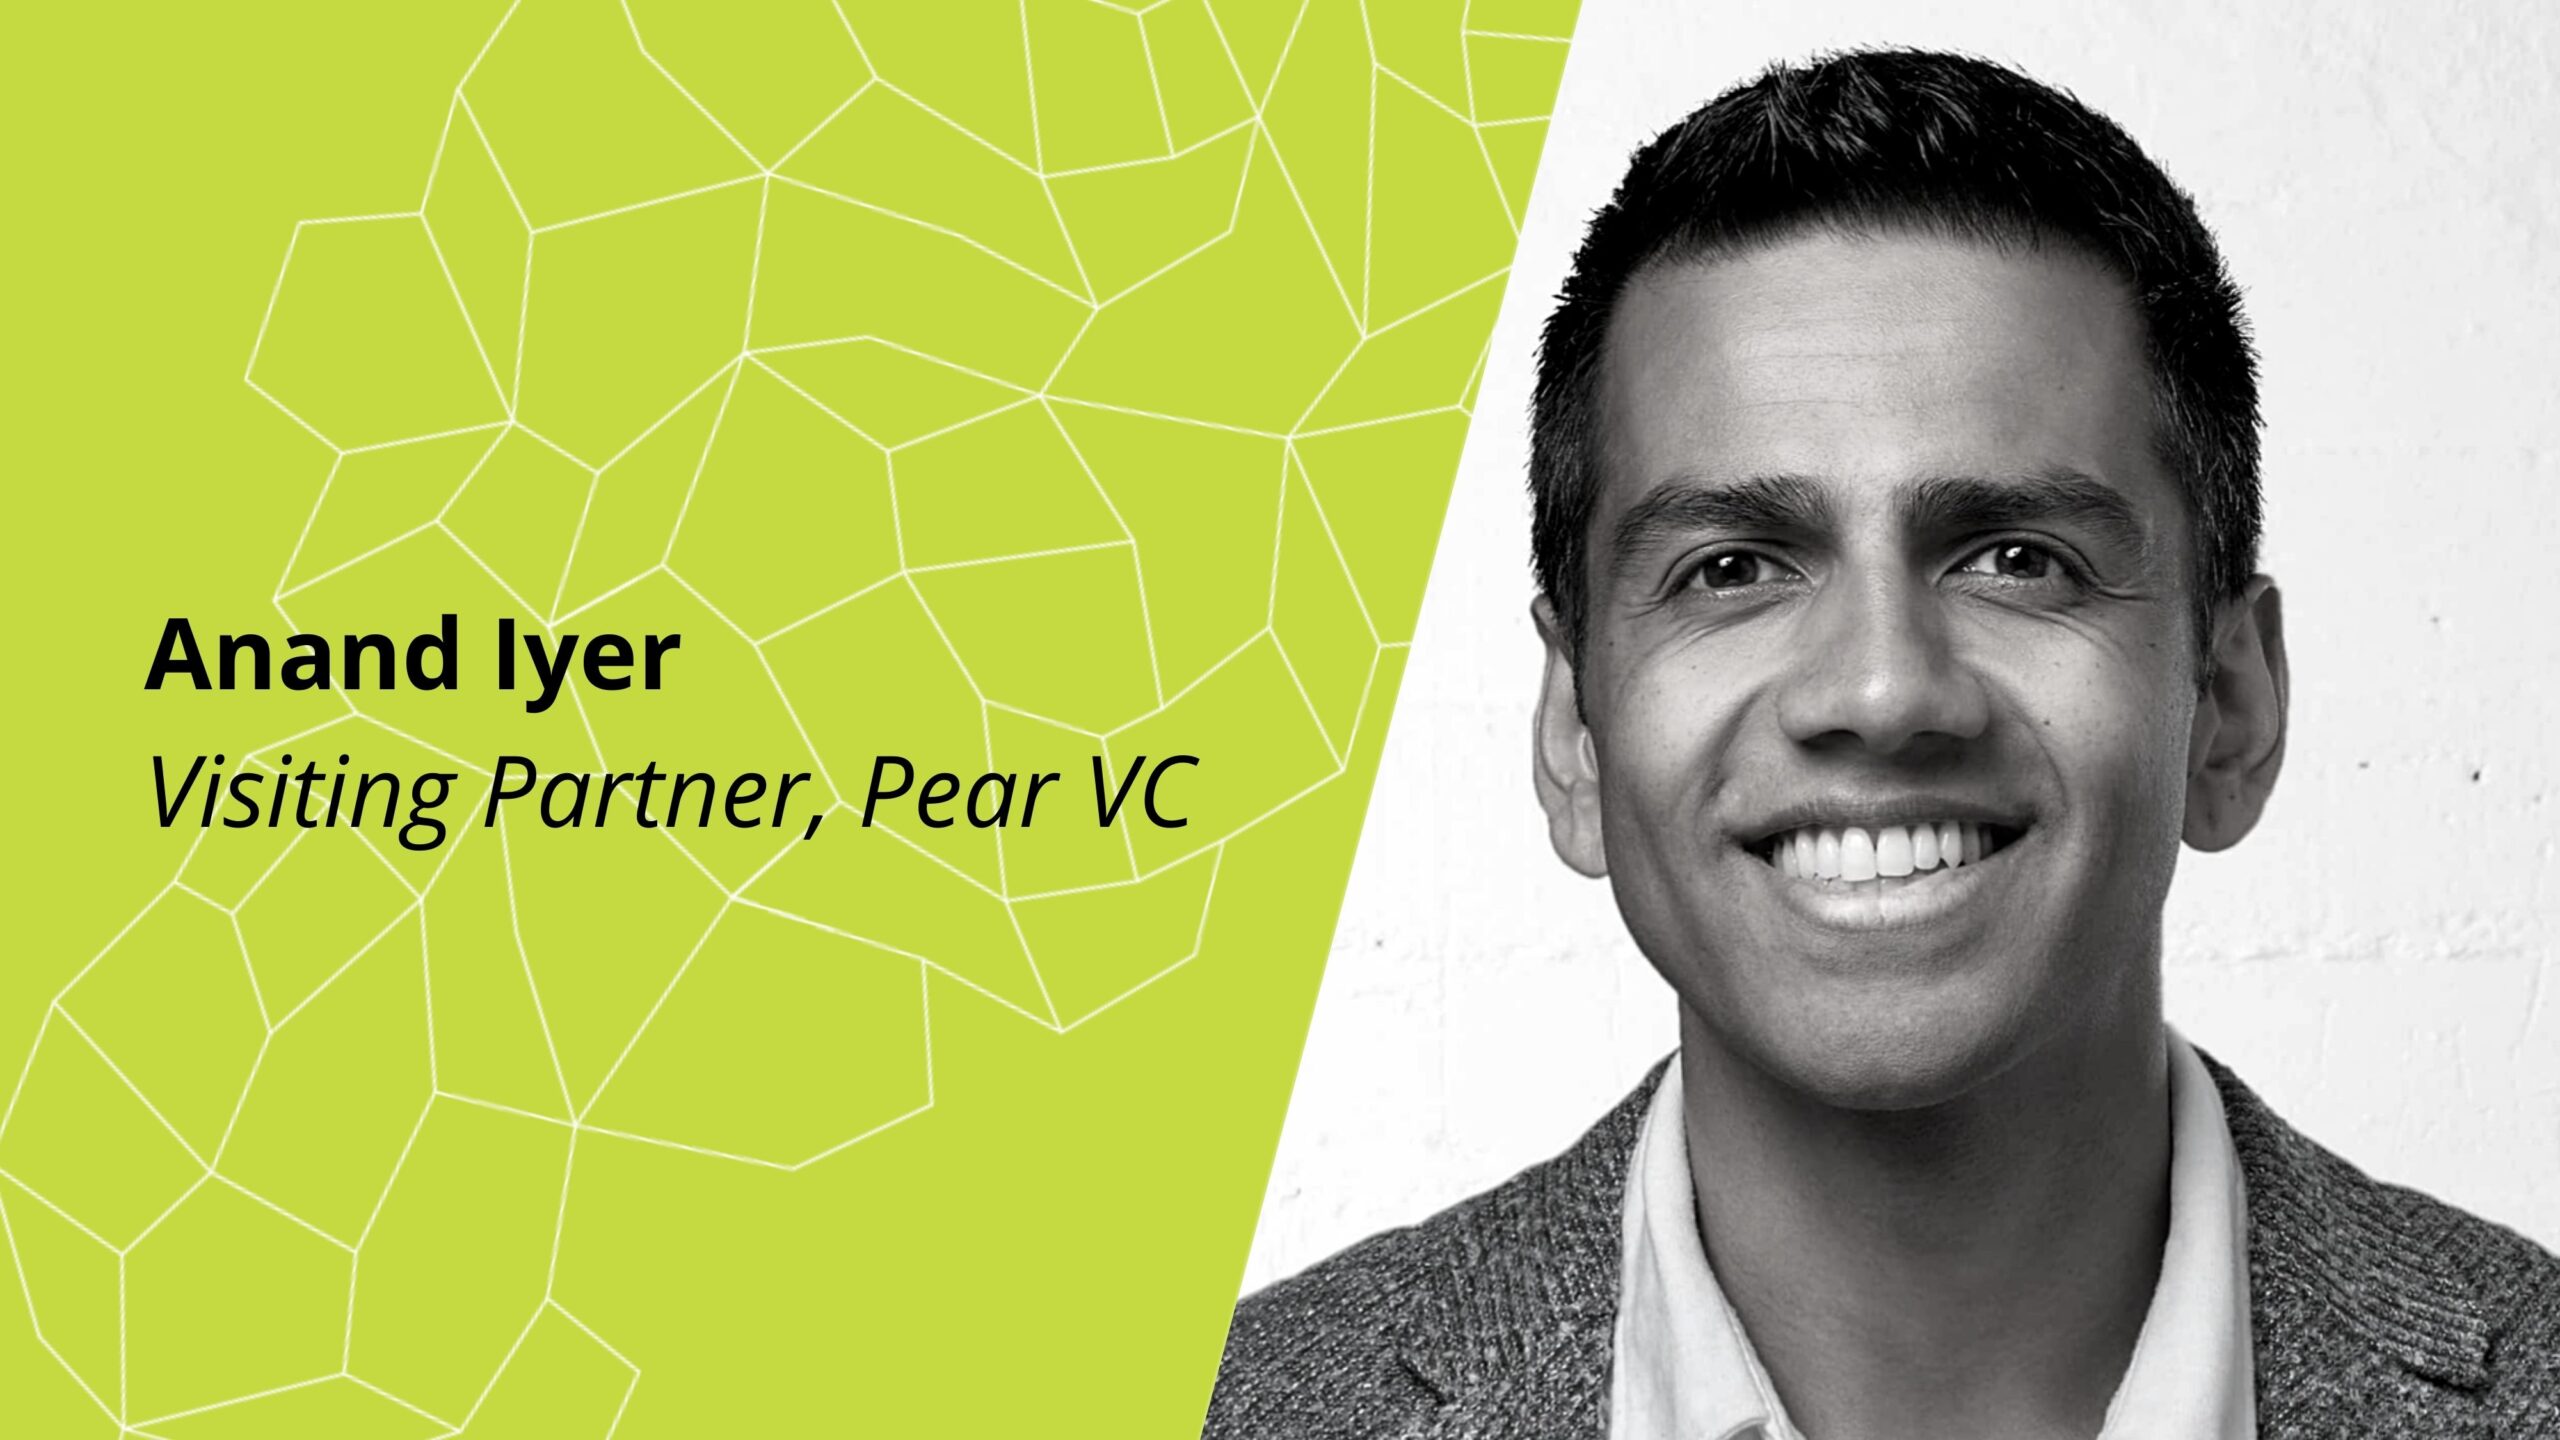 Pear Partners From 0 to 1: Anand Iyer